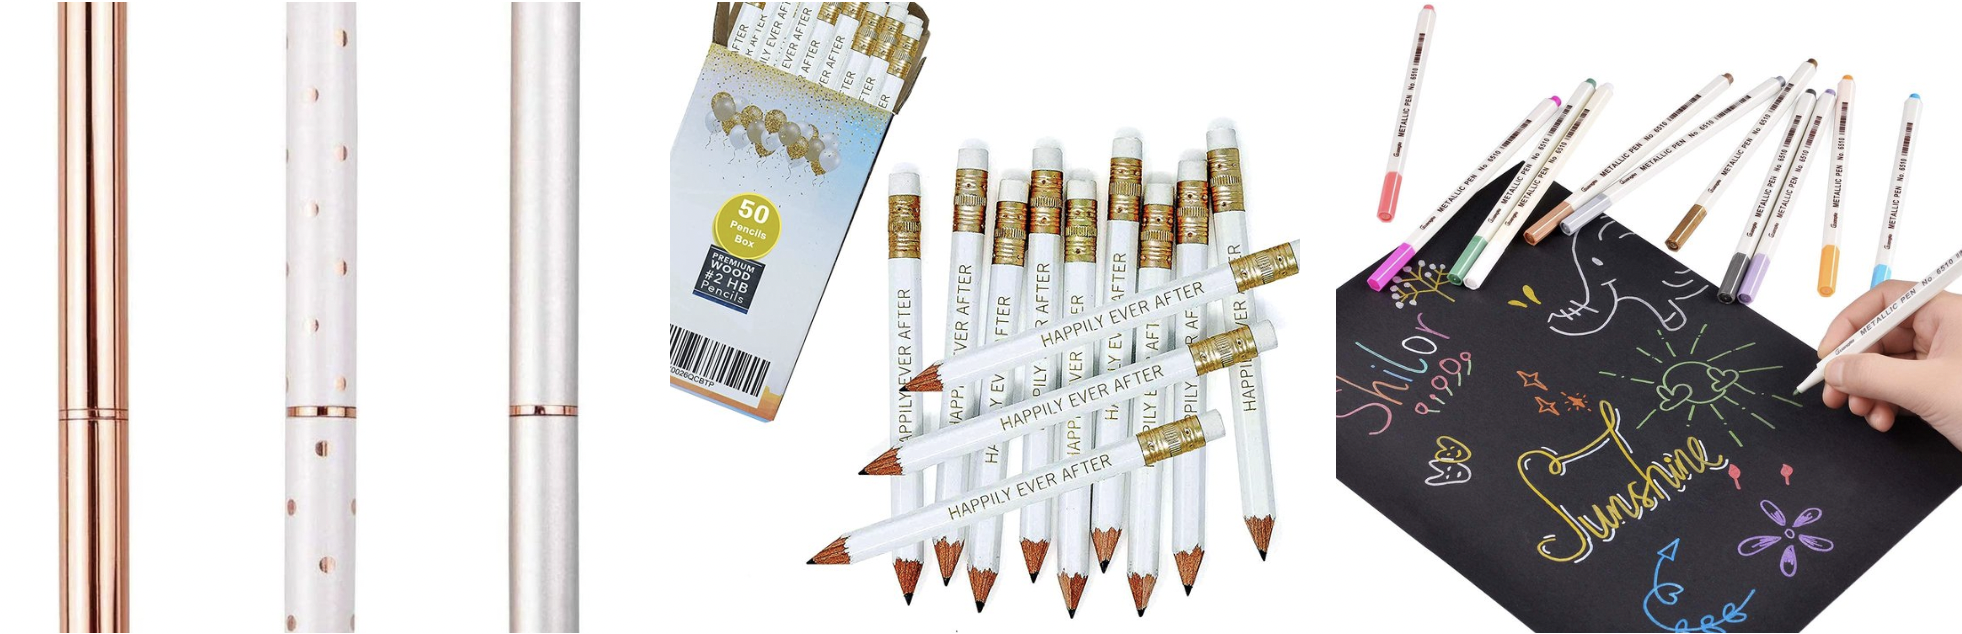 Wedding Pencils and Wedding Pens Gift Favors